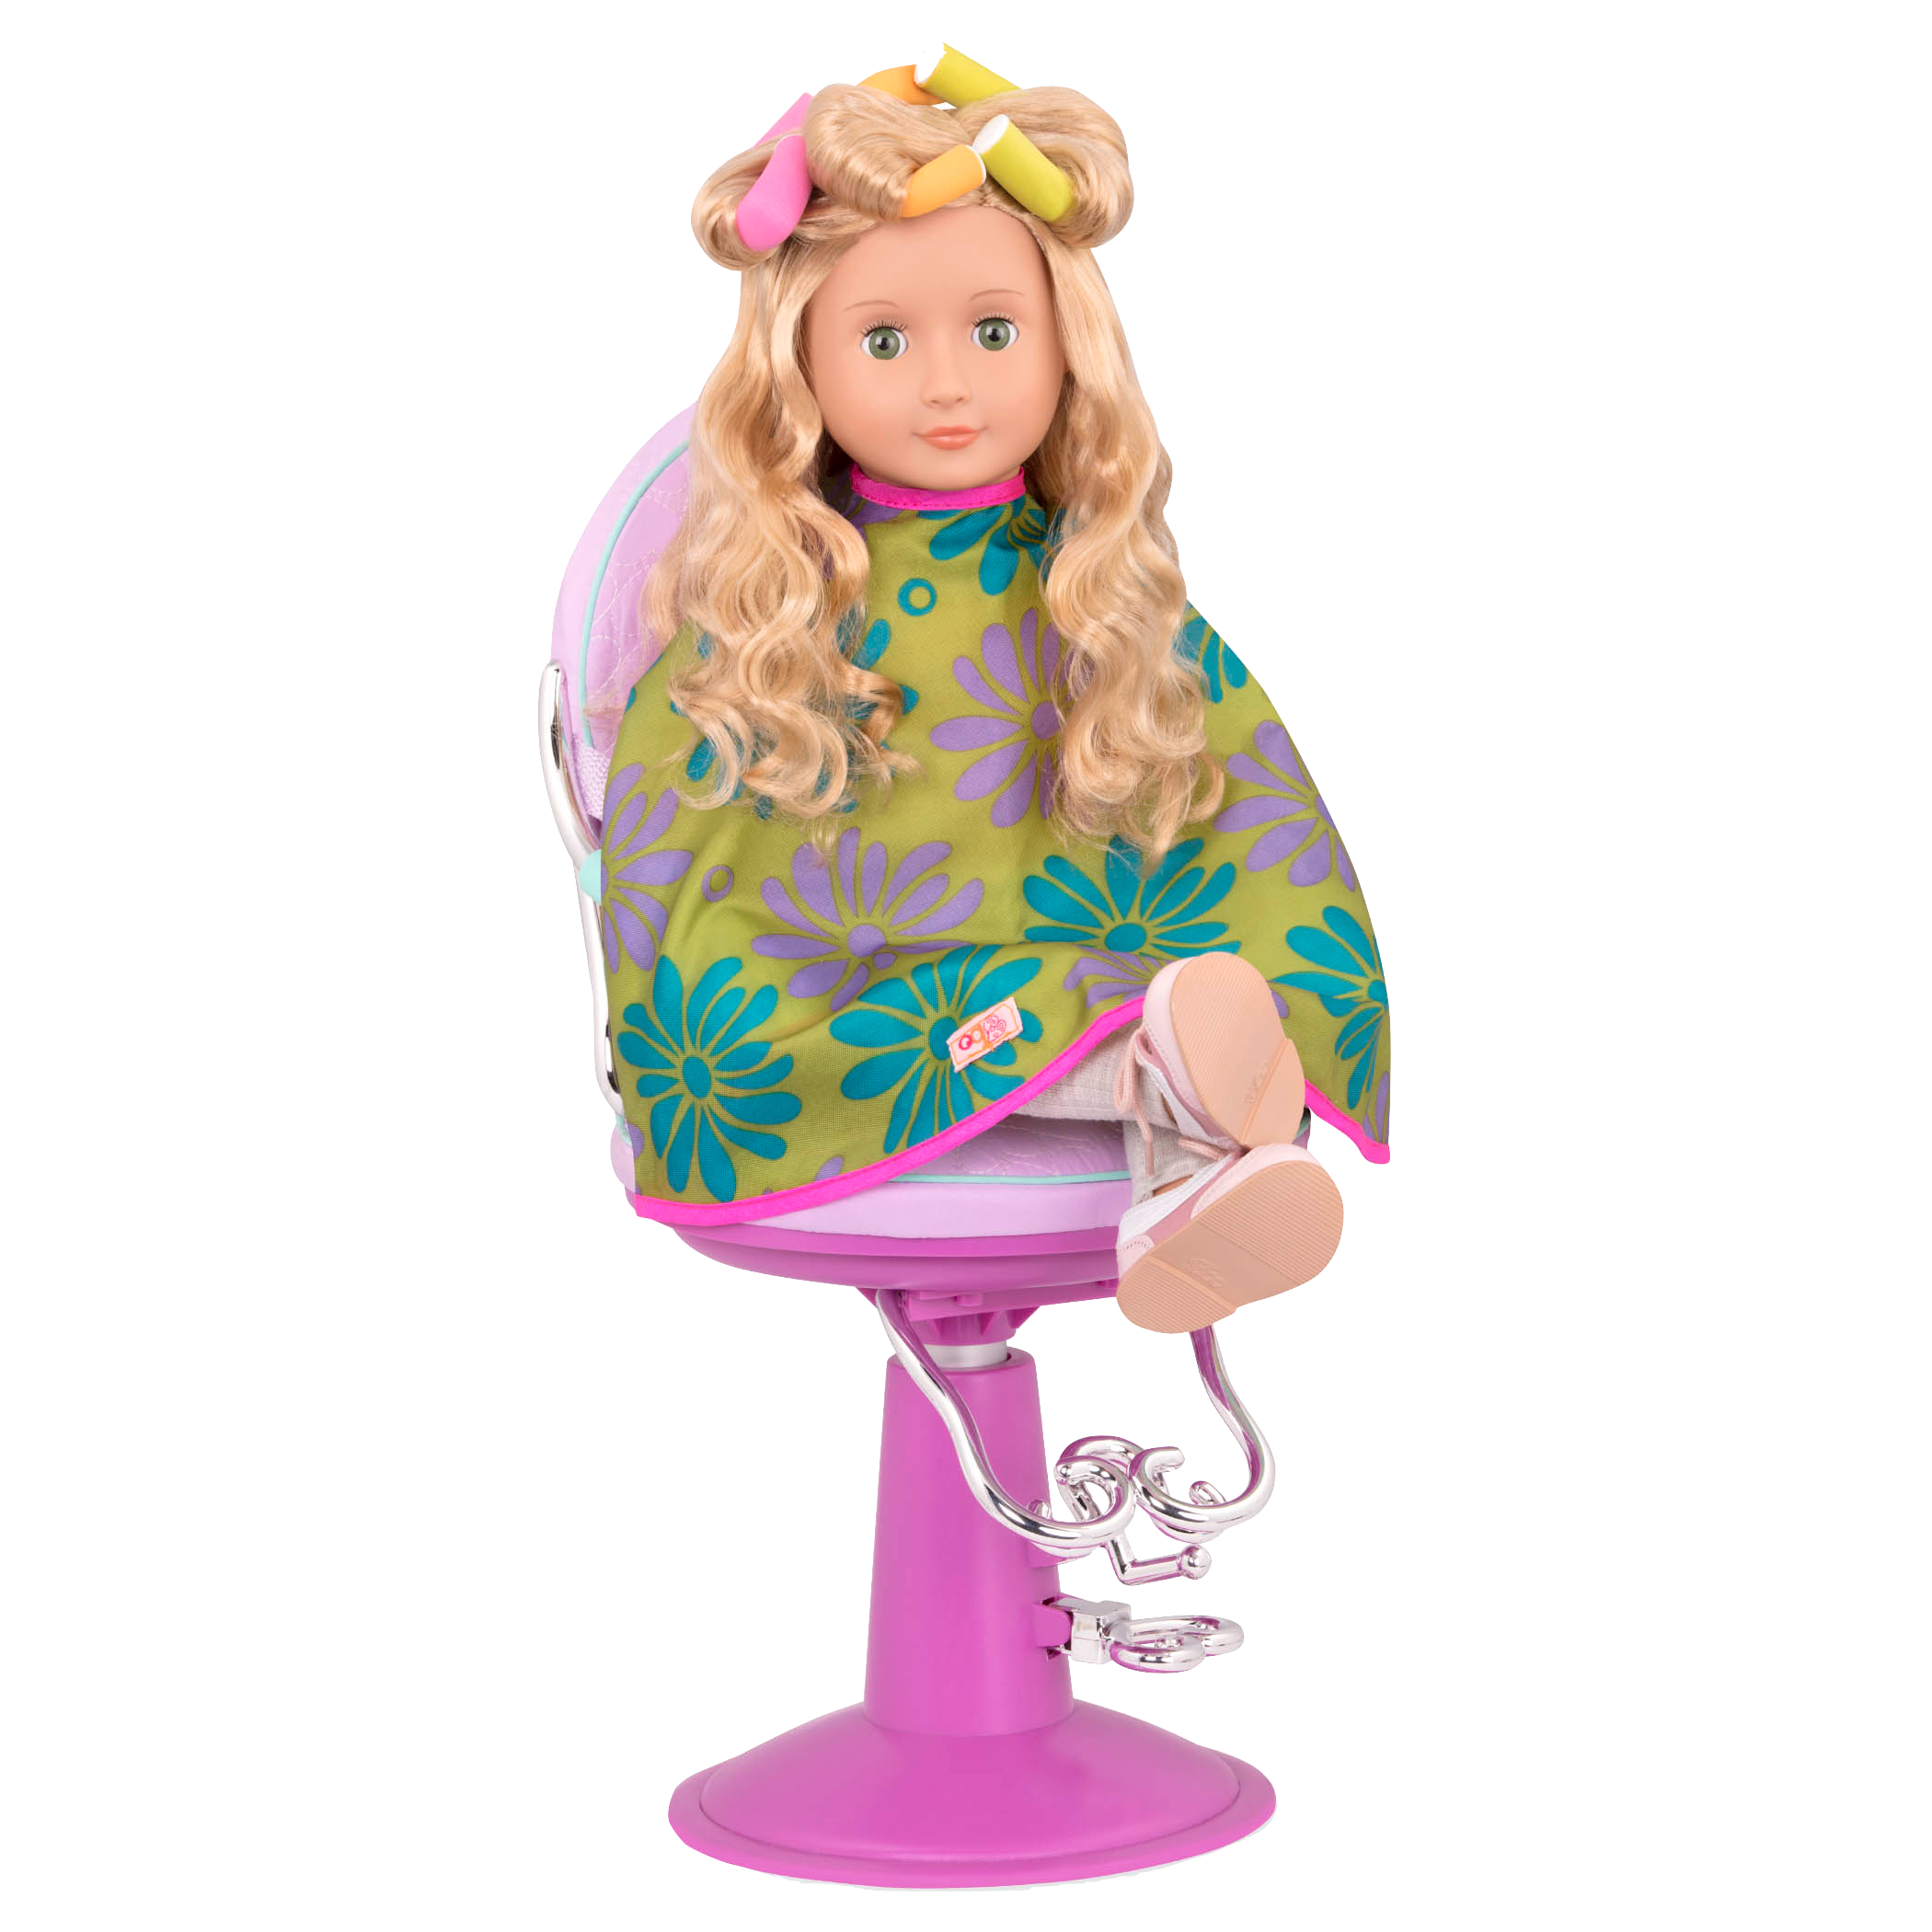 18-inch doll using hair curling accessories